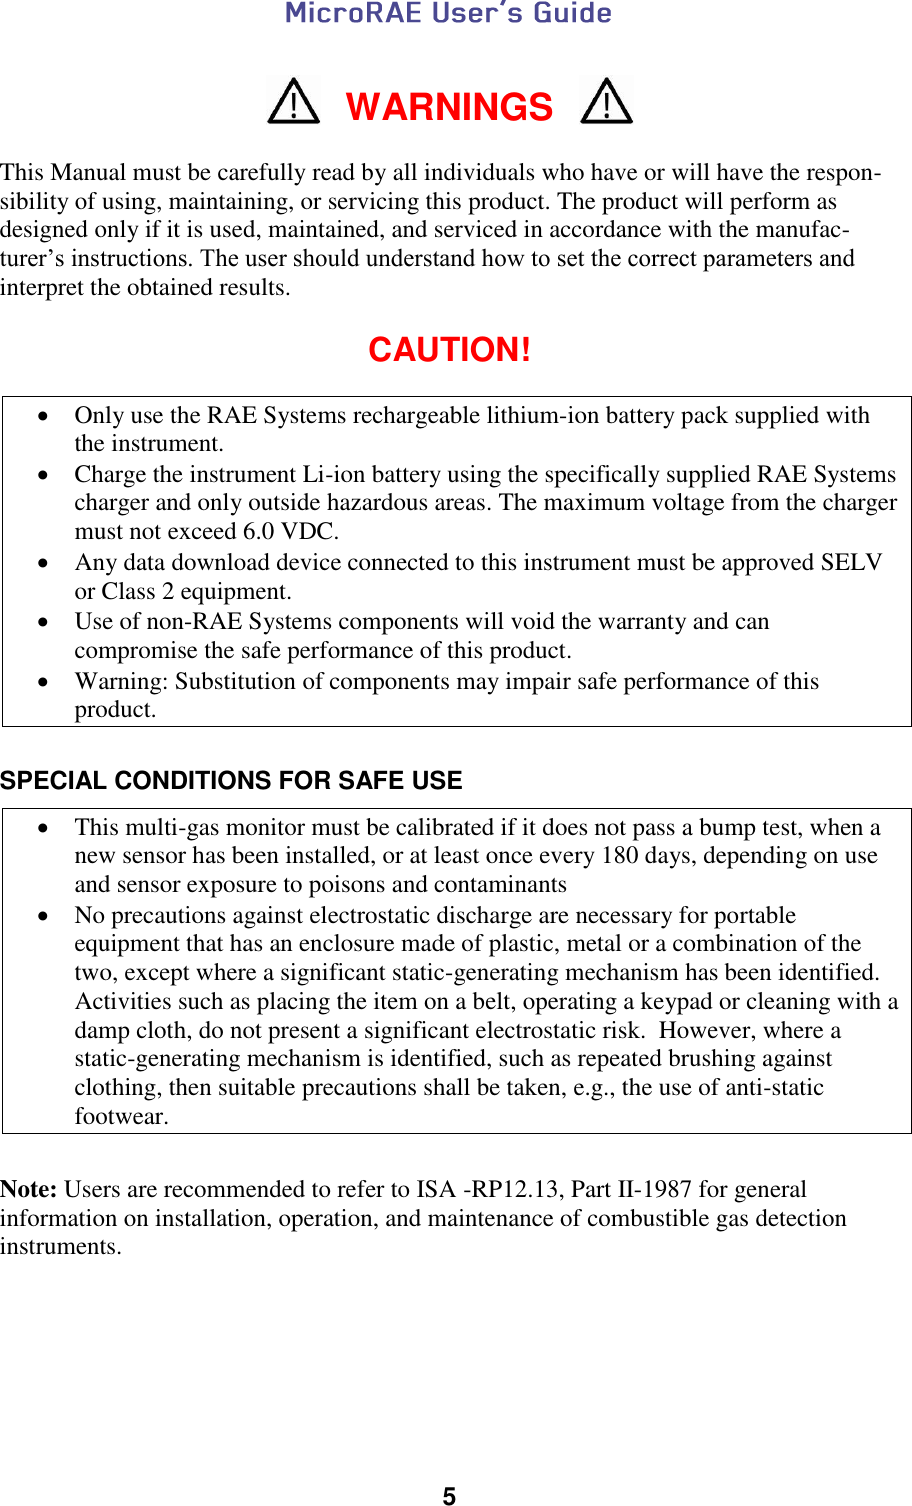  5   WARNINGS  This Manual must be carefully read by all individuals who have or will have the respon-sibility of using, maintaining, or servicing this product. The product will perform as designed only if it is used, maintained, and serviced in accordance with the manufac-turer’s instructions. The user should understand how to set the correct parameters and interpret the obtained results.  CAUTION!   Only use the RAE Systems rechargeable lithium-ion battery pack supplied with the instrument.   Charge the instrument Li-ion battery using the specifically supplied RAE Systems charger and only outside hazardous areas. The maximum voltage from the charger must not exceed 6.0 VDC.  Any data download device connected to this instrument must be approved SELV or Class 2 equipment.  Use of non-RAE Systems components will void the warranty and can compromise the safe performance of this product.  Warning: Substitution of components may impair safe performance of this product.  SPECIAL CONDITIONS FOR SAFE USE   This multi-gas monitor must be calibrated if it does not pass a bump test, when a new sensor has been installed, or at least once every 180 days, depending on use and sensor exposure to poisons and contaminants  No precautions against electrostatic discharge are necessary for portable equipment that has an enclosure made of plastic, metal or a combination of the two, except where a significant static-generating mechanism has been identified.  Activities such as placing the item on a belt, operating a keypad or cleaning with a damp cloth, do not present a significant electrostatic risk.  However, where a static-generating mechanism is identified, such as repeated brushing against clothing, then suitable precautions shall be taken, e.g., the use of anti-static footwear.  Note: Users are recommended to refer to ISA -RP12.13, Part II-1987 for general information on installation, operation, and maintenance of combustible gas detection instruments.       